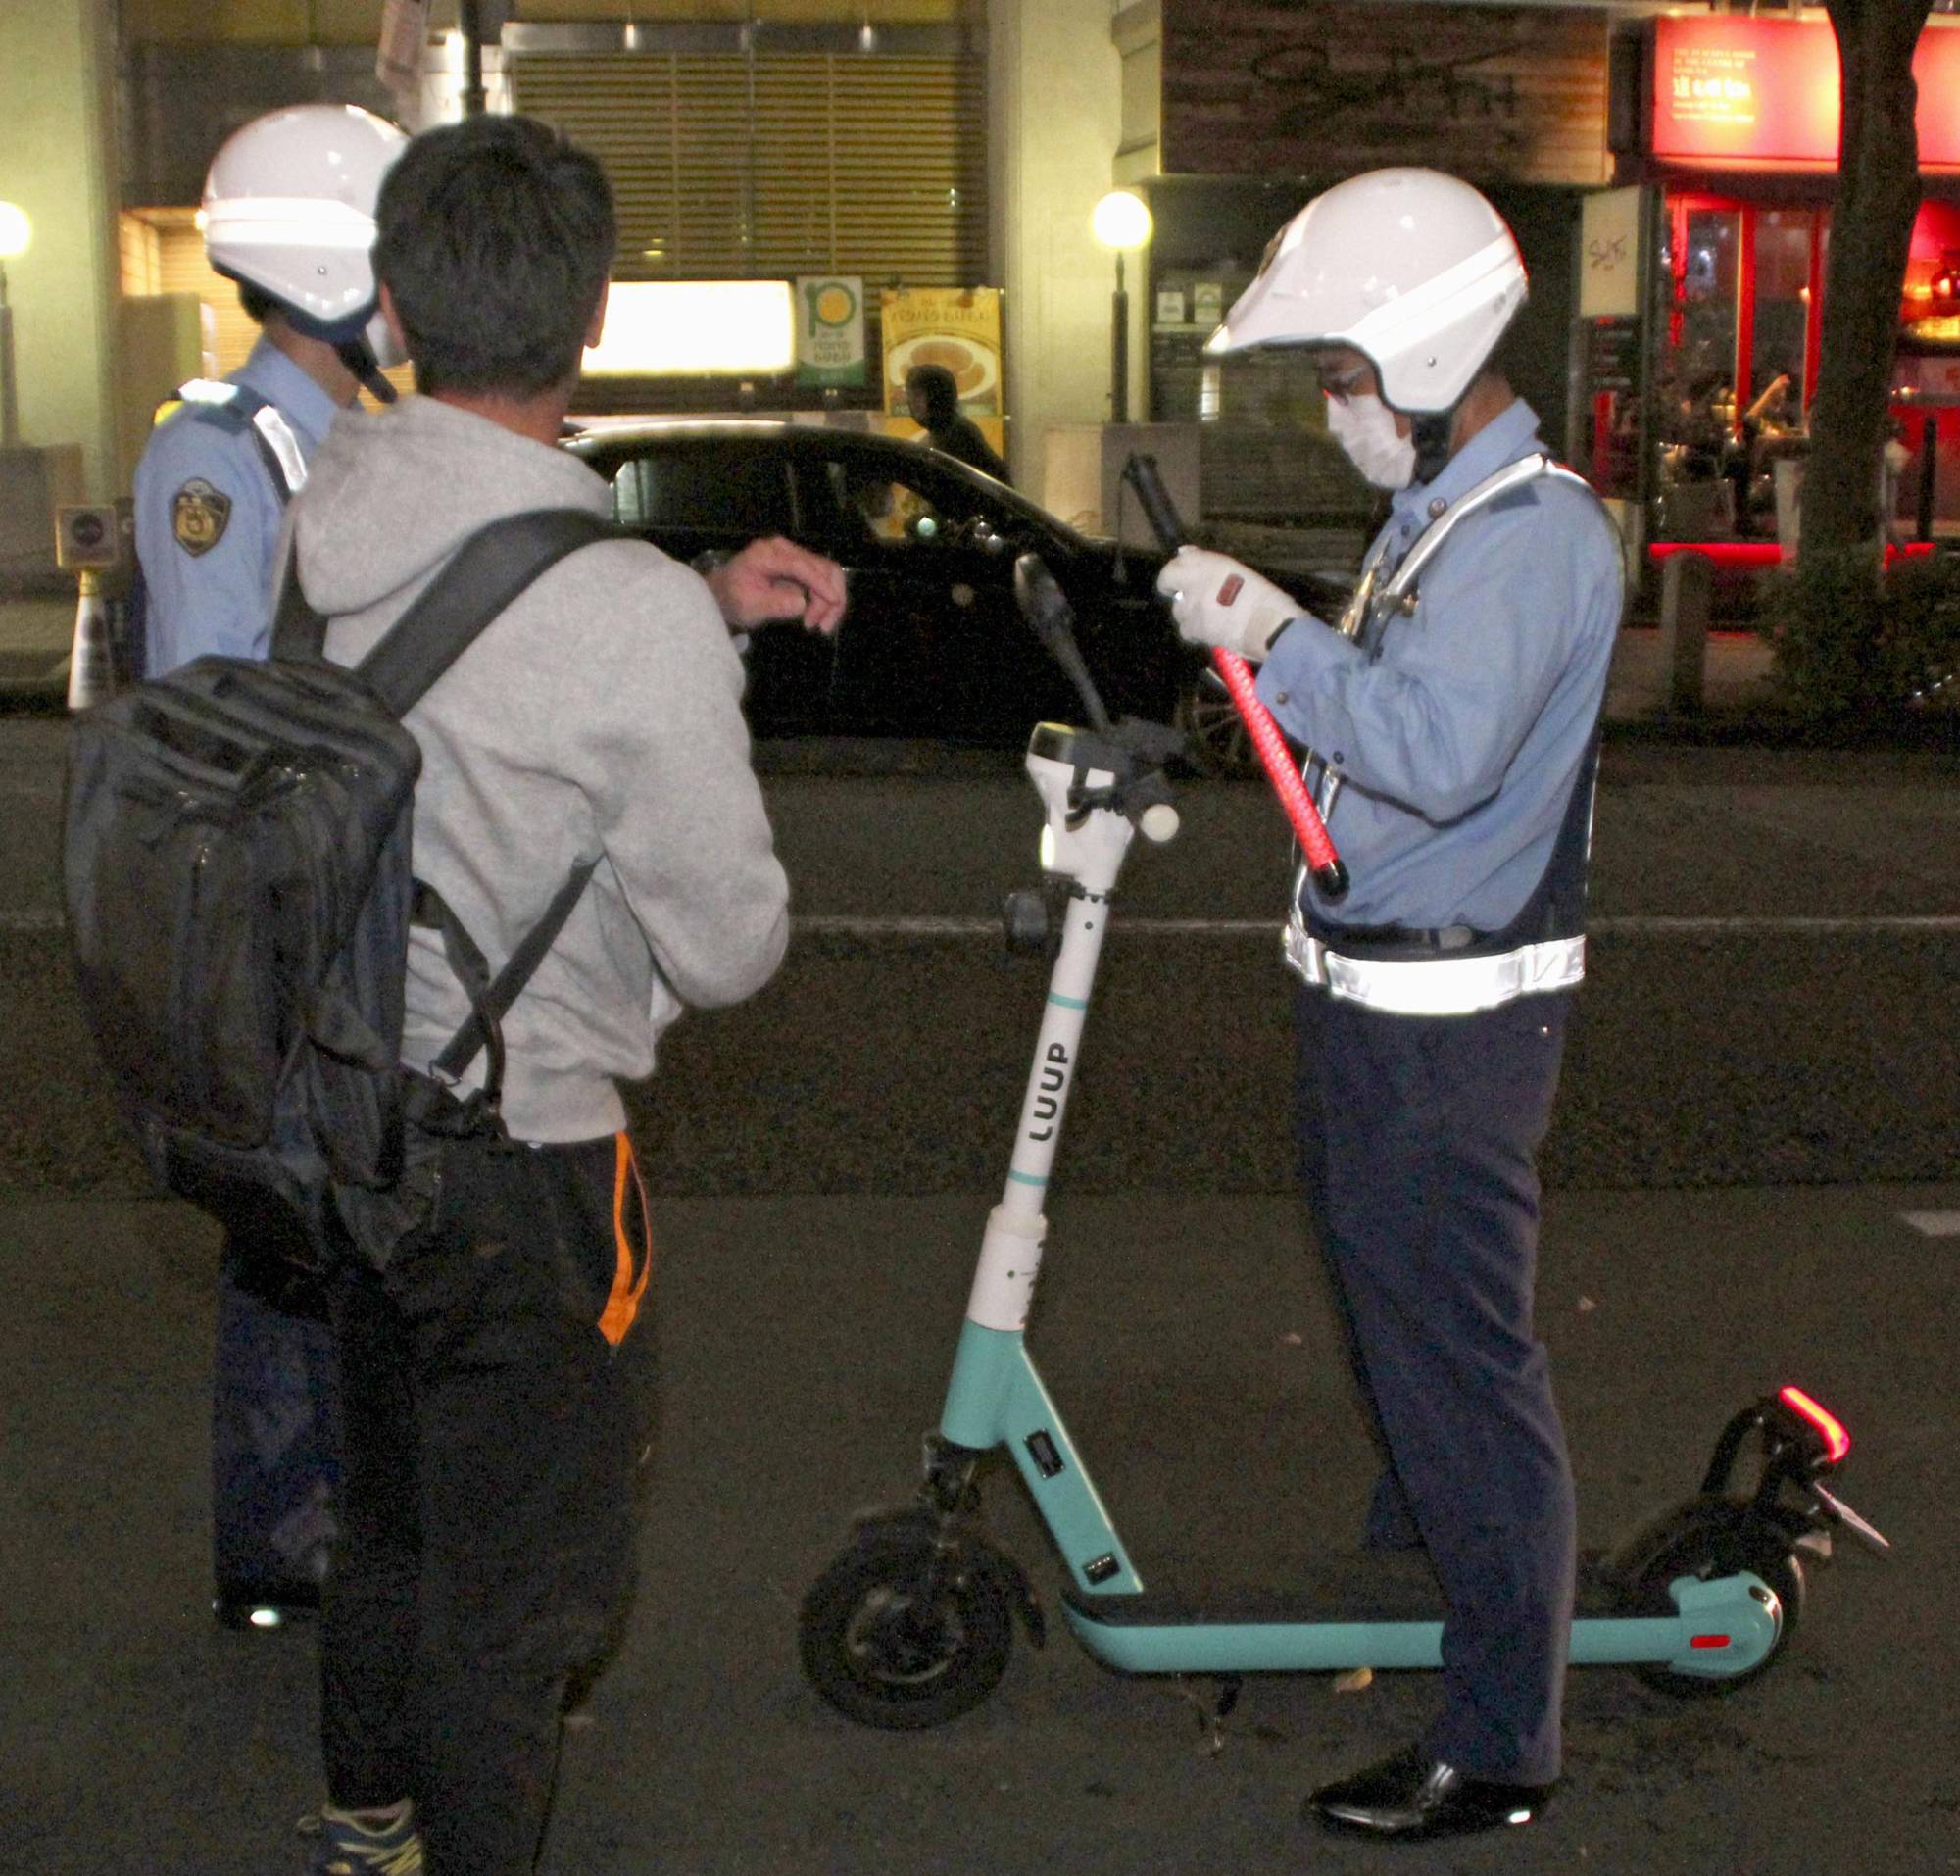 Police officers conduct an alcohol breath test on an electric scooter rider near Shibuya Station in Tokyo on Oct. 15. | KYODO